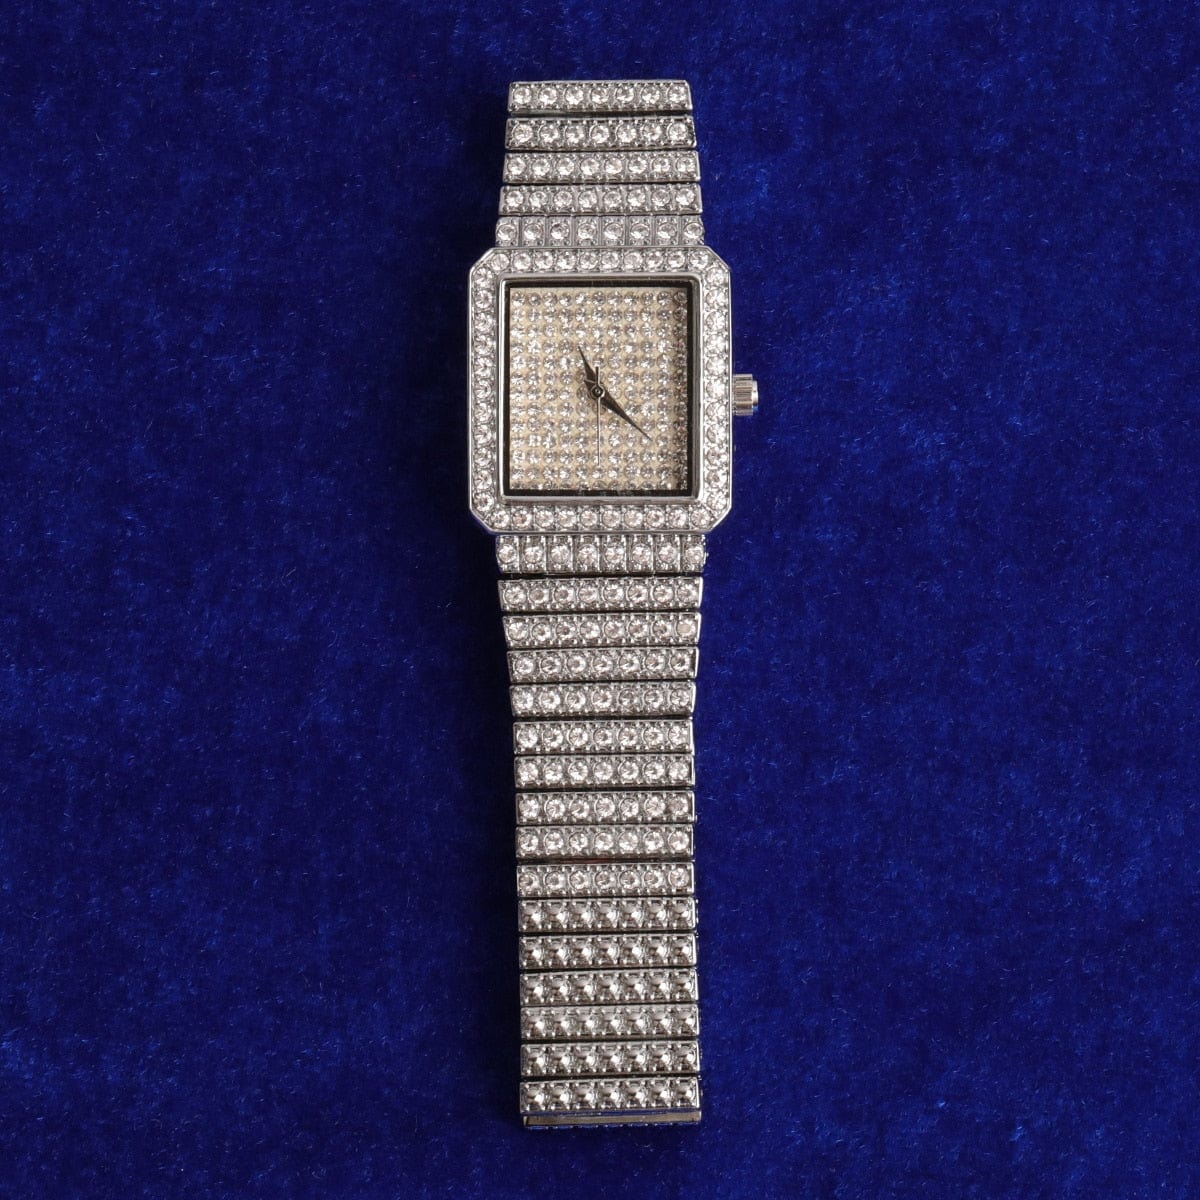 VVS Jewelry hip hop jewelry Silver Women's Fully Iced Square Bling Watch